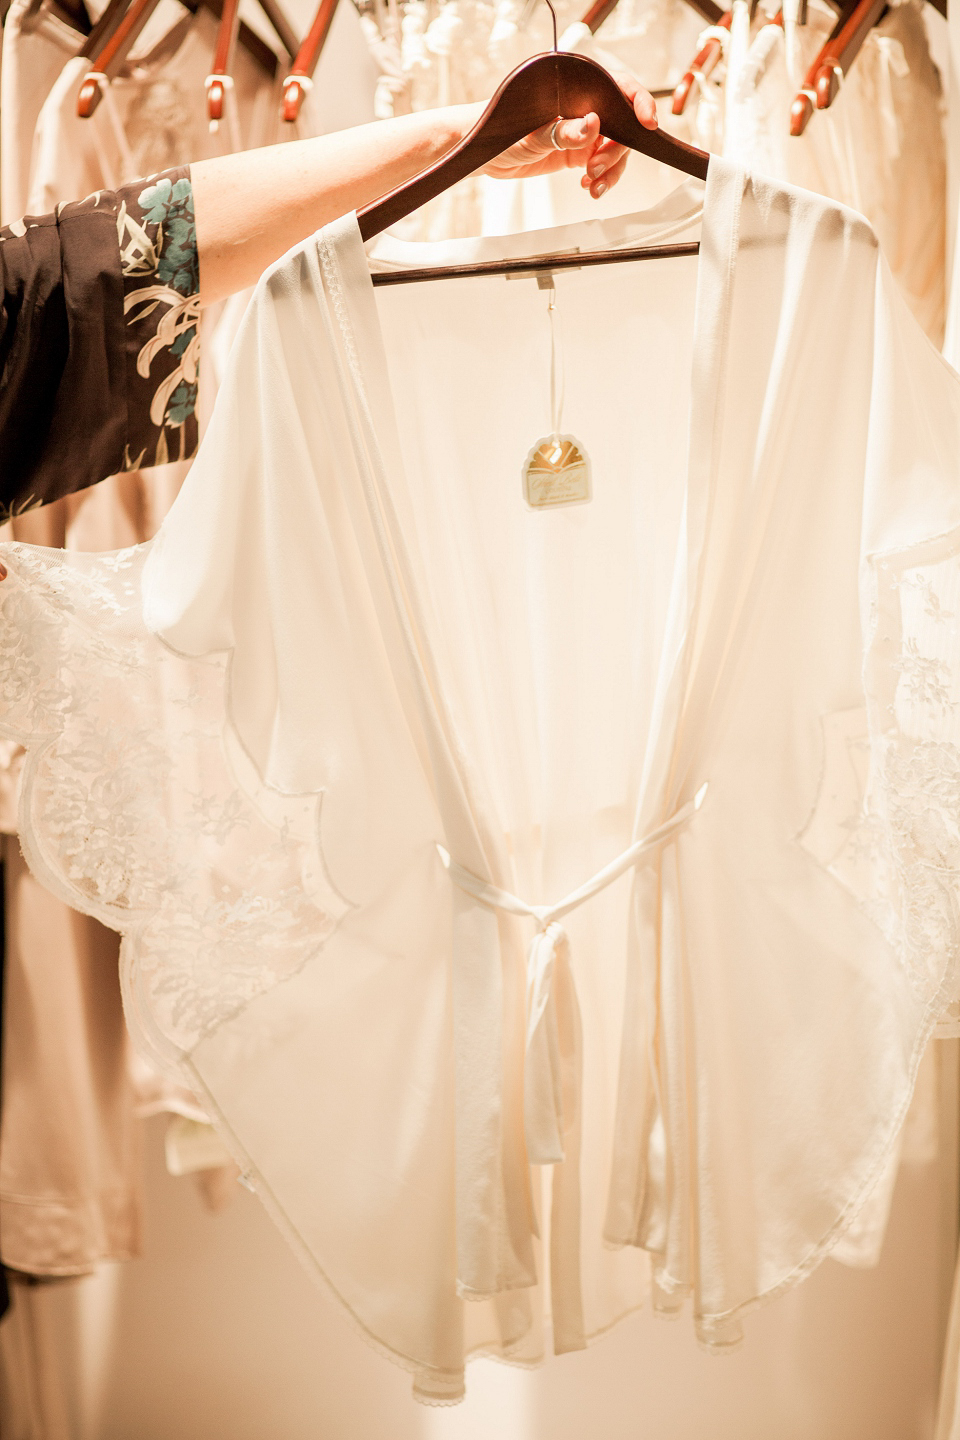 Shell Belle luxury loungewear and lingerie at The White Gallery, London, April 2014